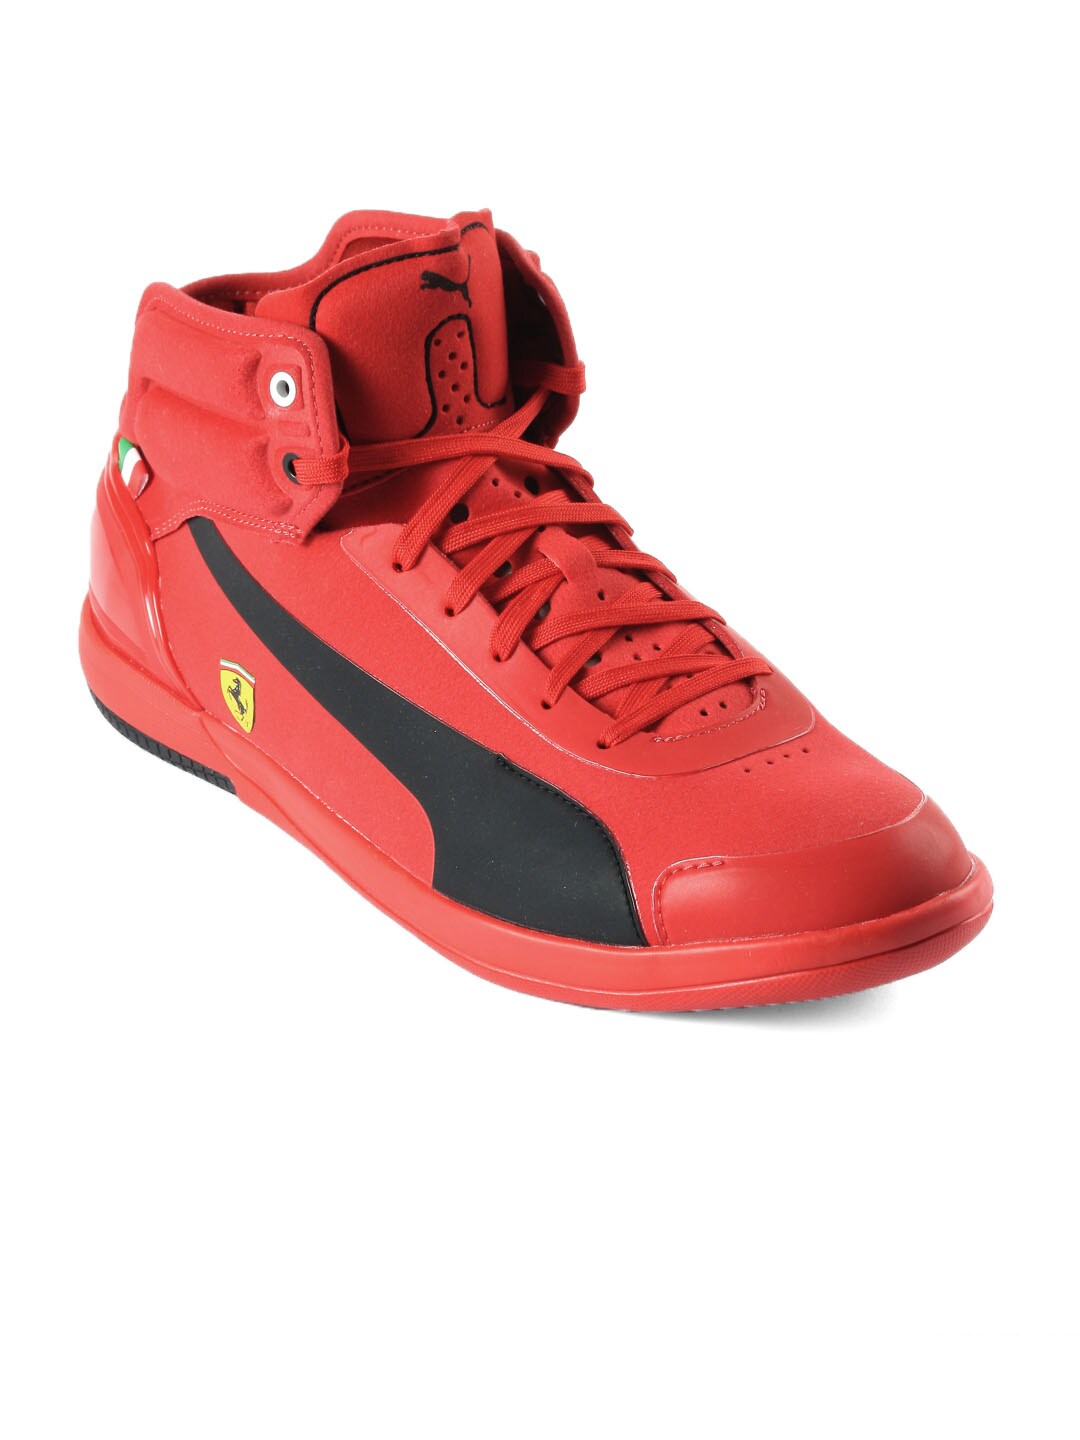 Puma Men Driving Power Light Red Casual Shoes